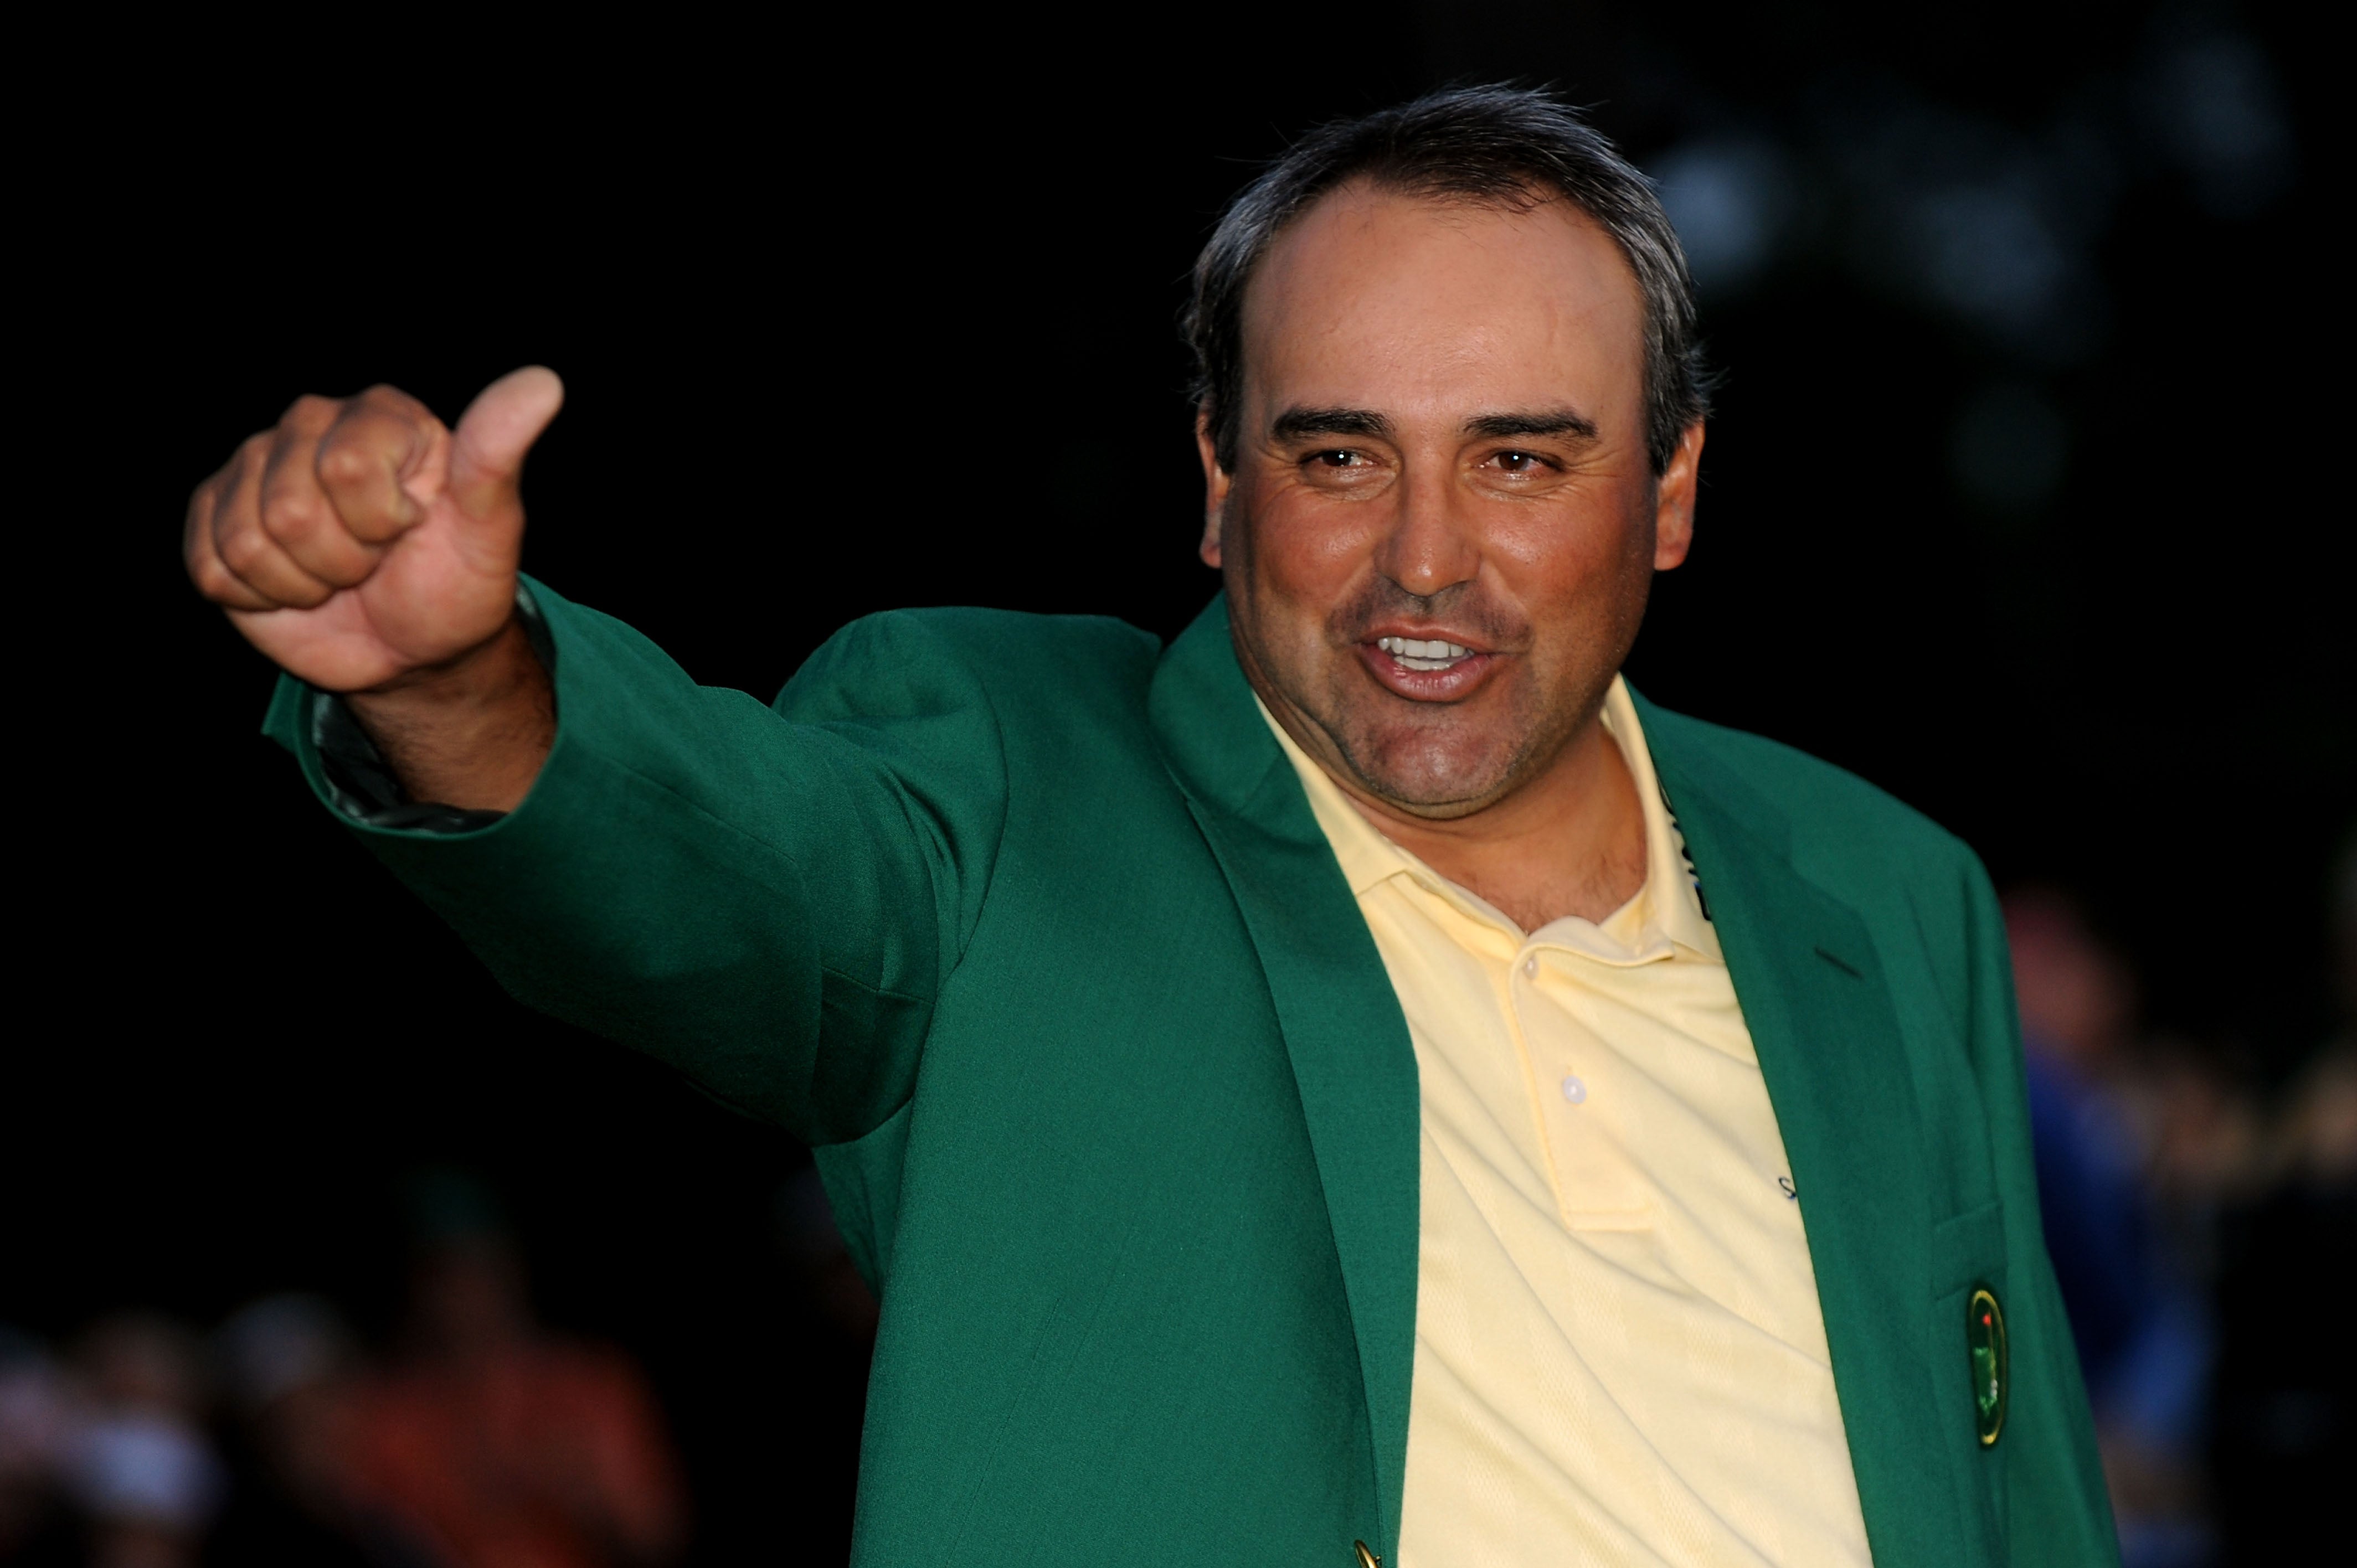 Angel Cabrera’s greatest moment came when winning the Masters in 2009